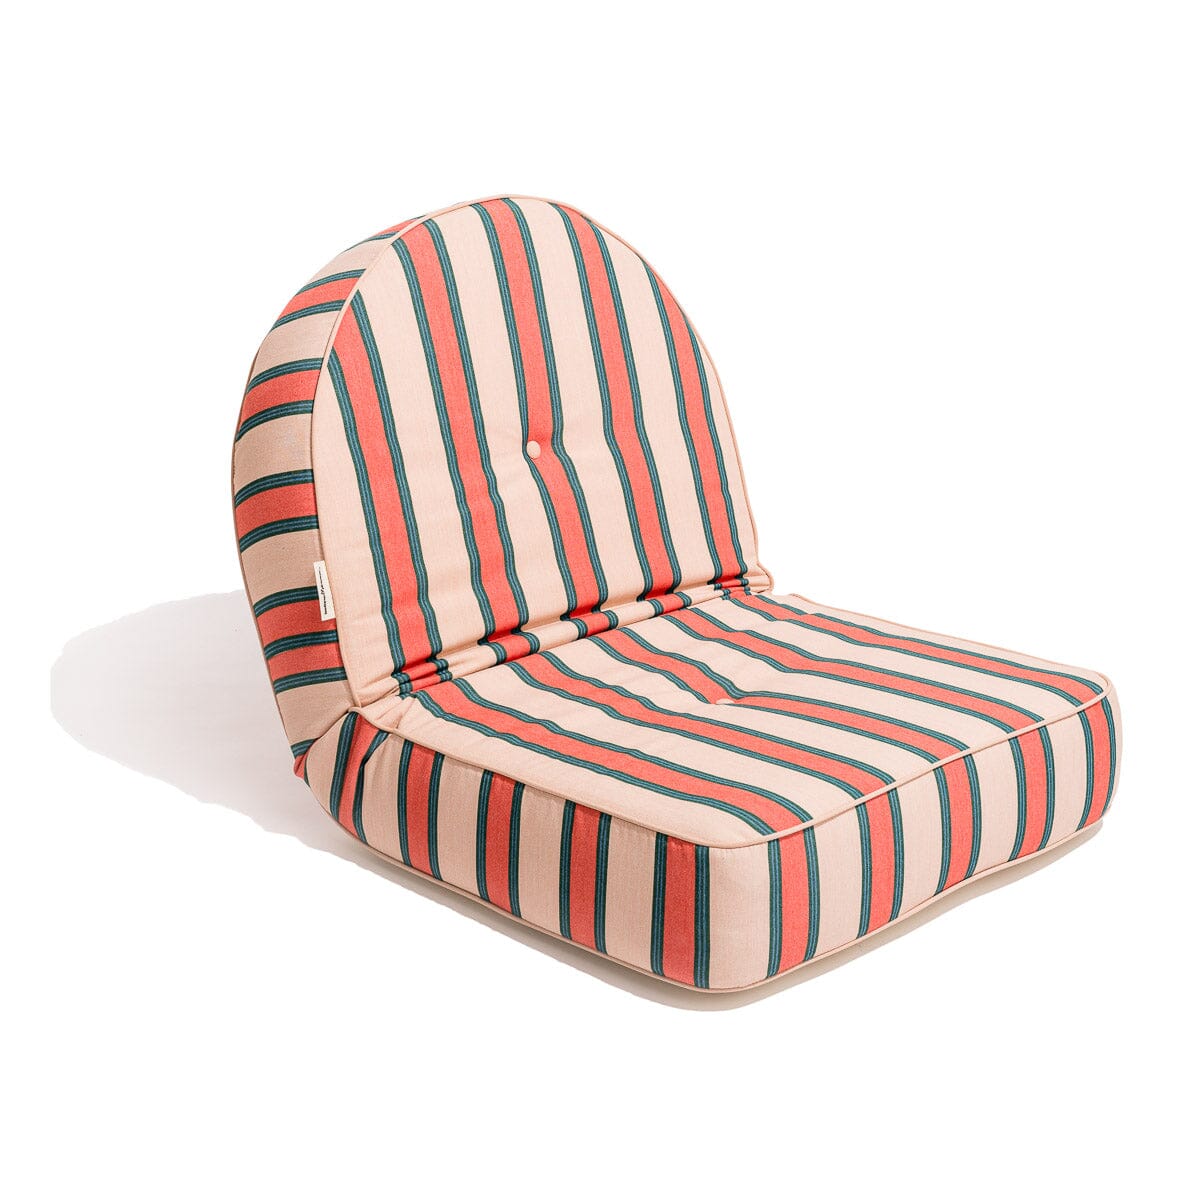 The Reclining Pillow Lounger - Bistro Dusty Pink Stripe Reclining Lounger Business & Pleasure Co 